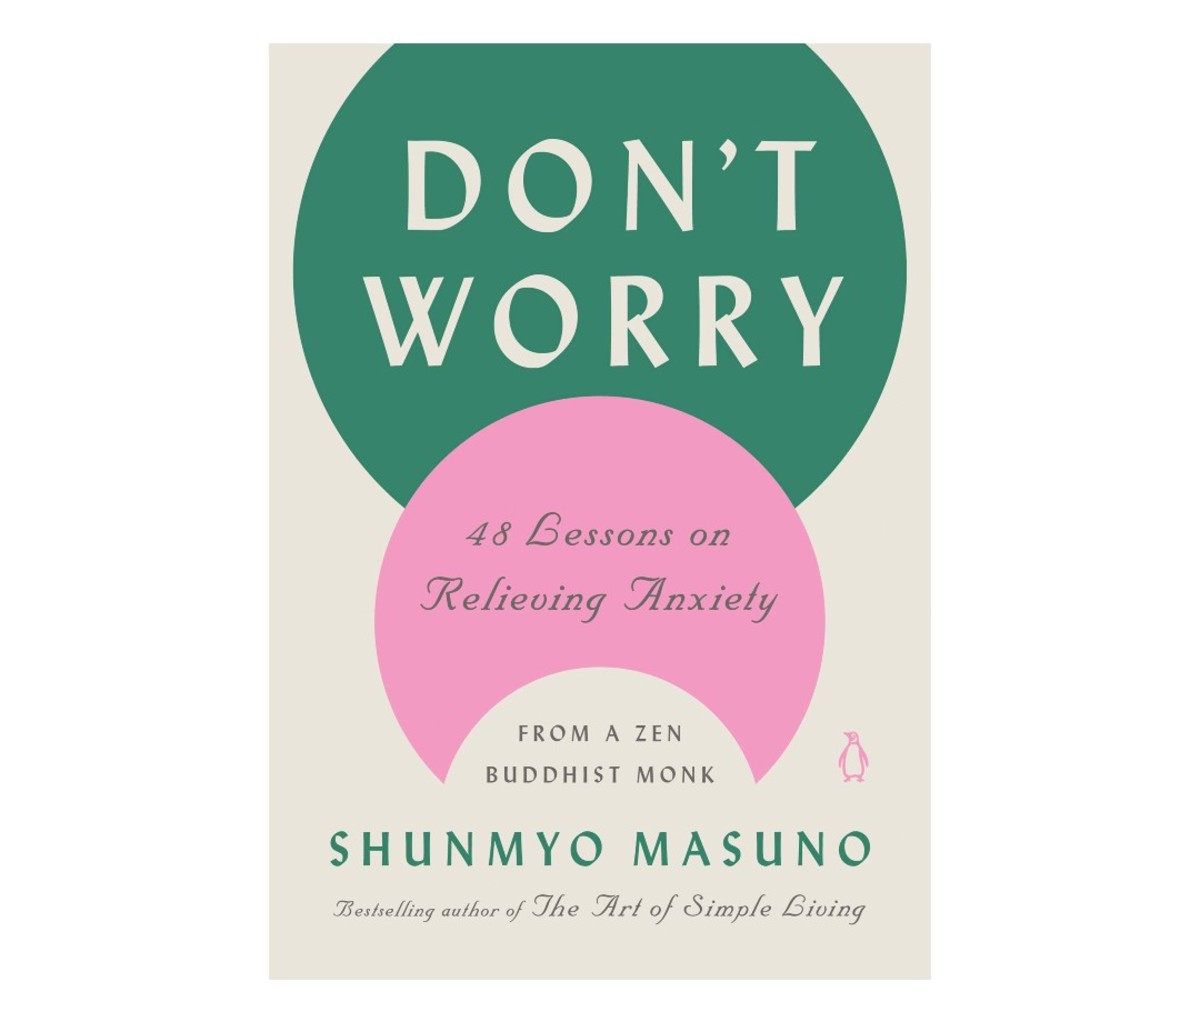 DON’T WORRY: 48 Lessons on Relieving Anxiety from a Zen Buddhist Monk by Shunmyo Masuno